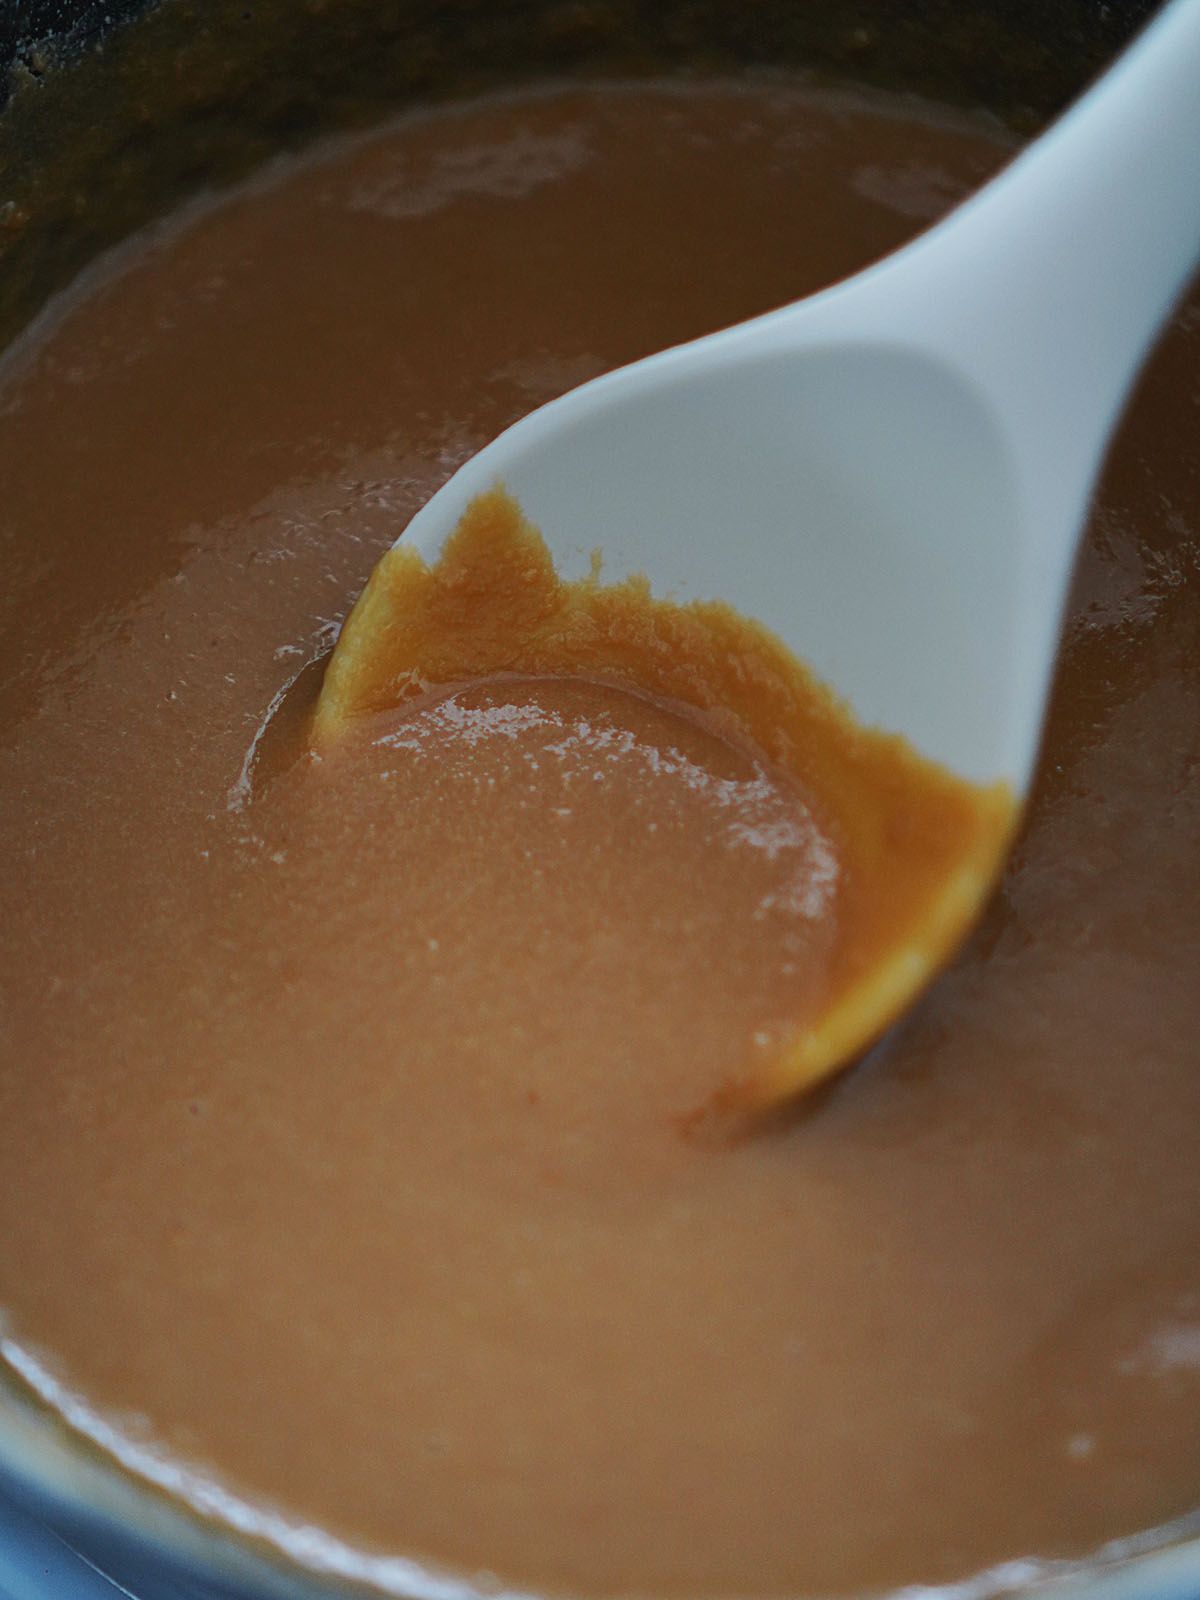 Caramel sauce in a pot with a white spoon.